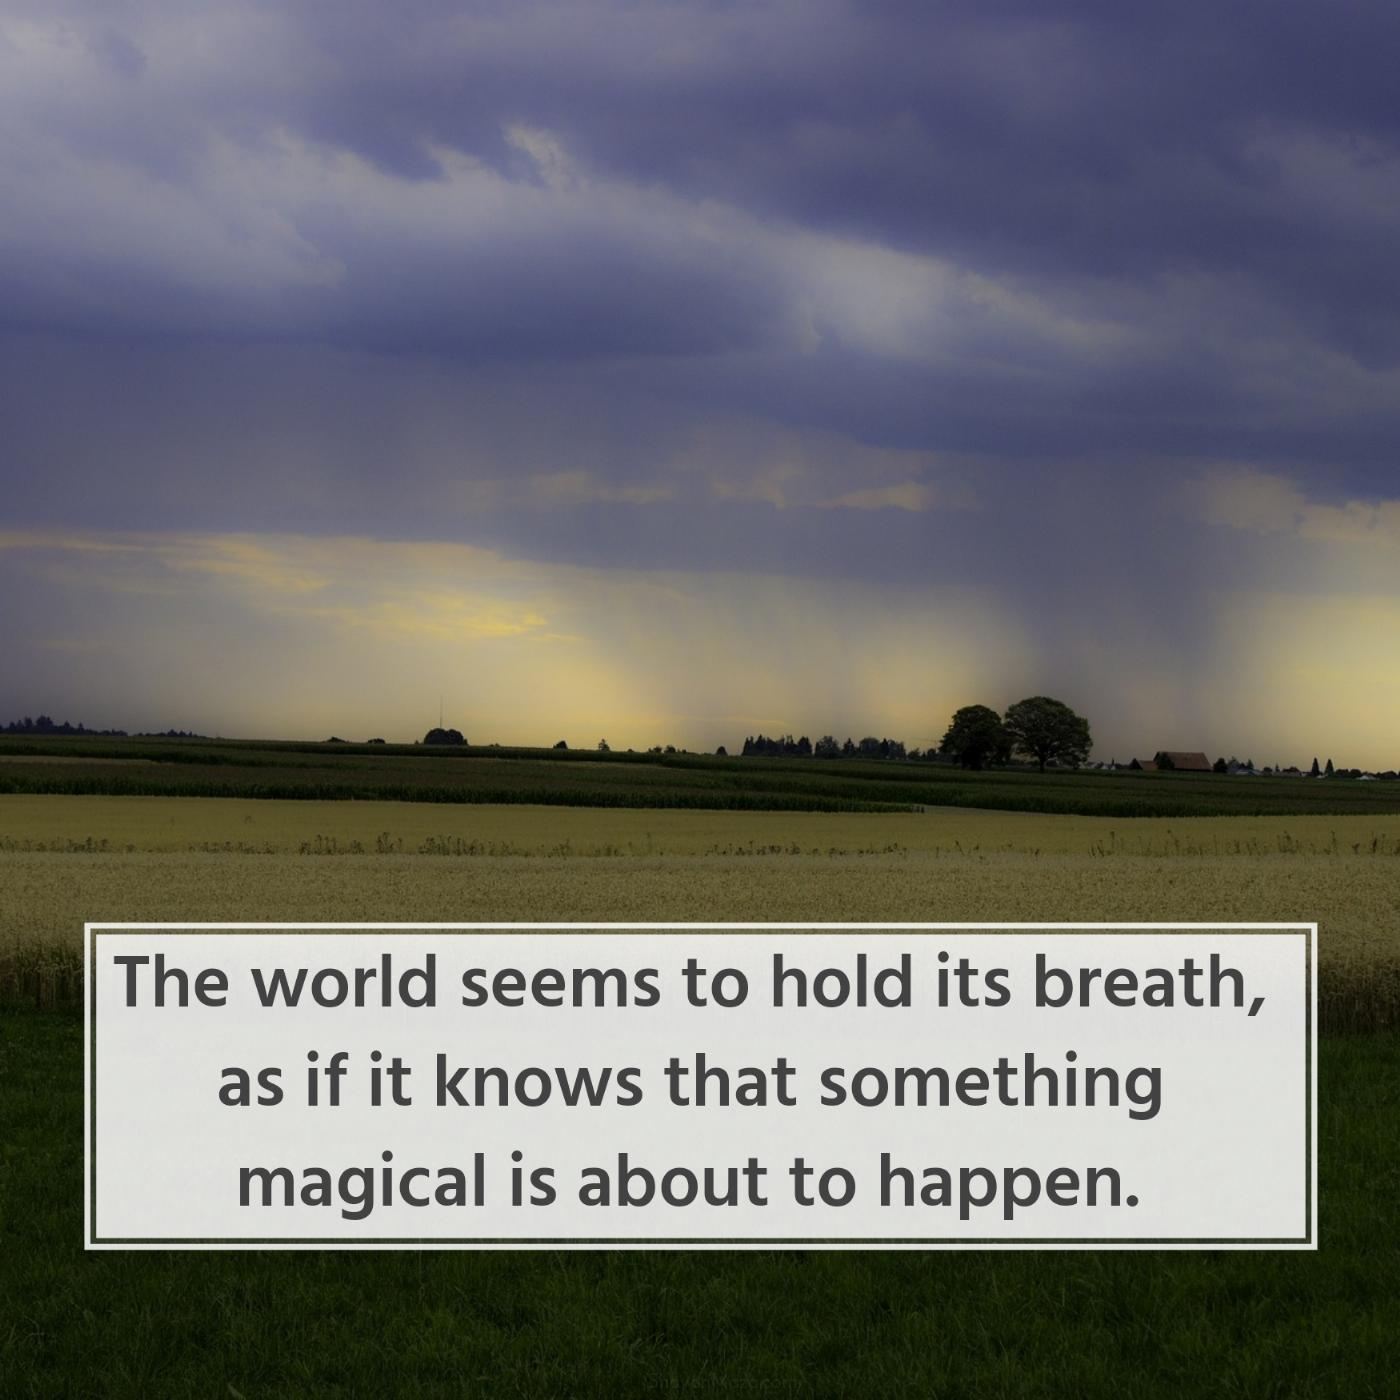 The world seems to hold its breath as if it knows